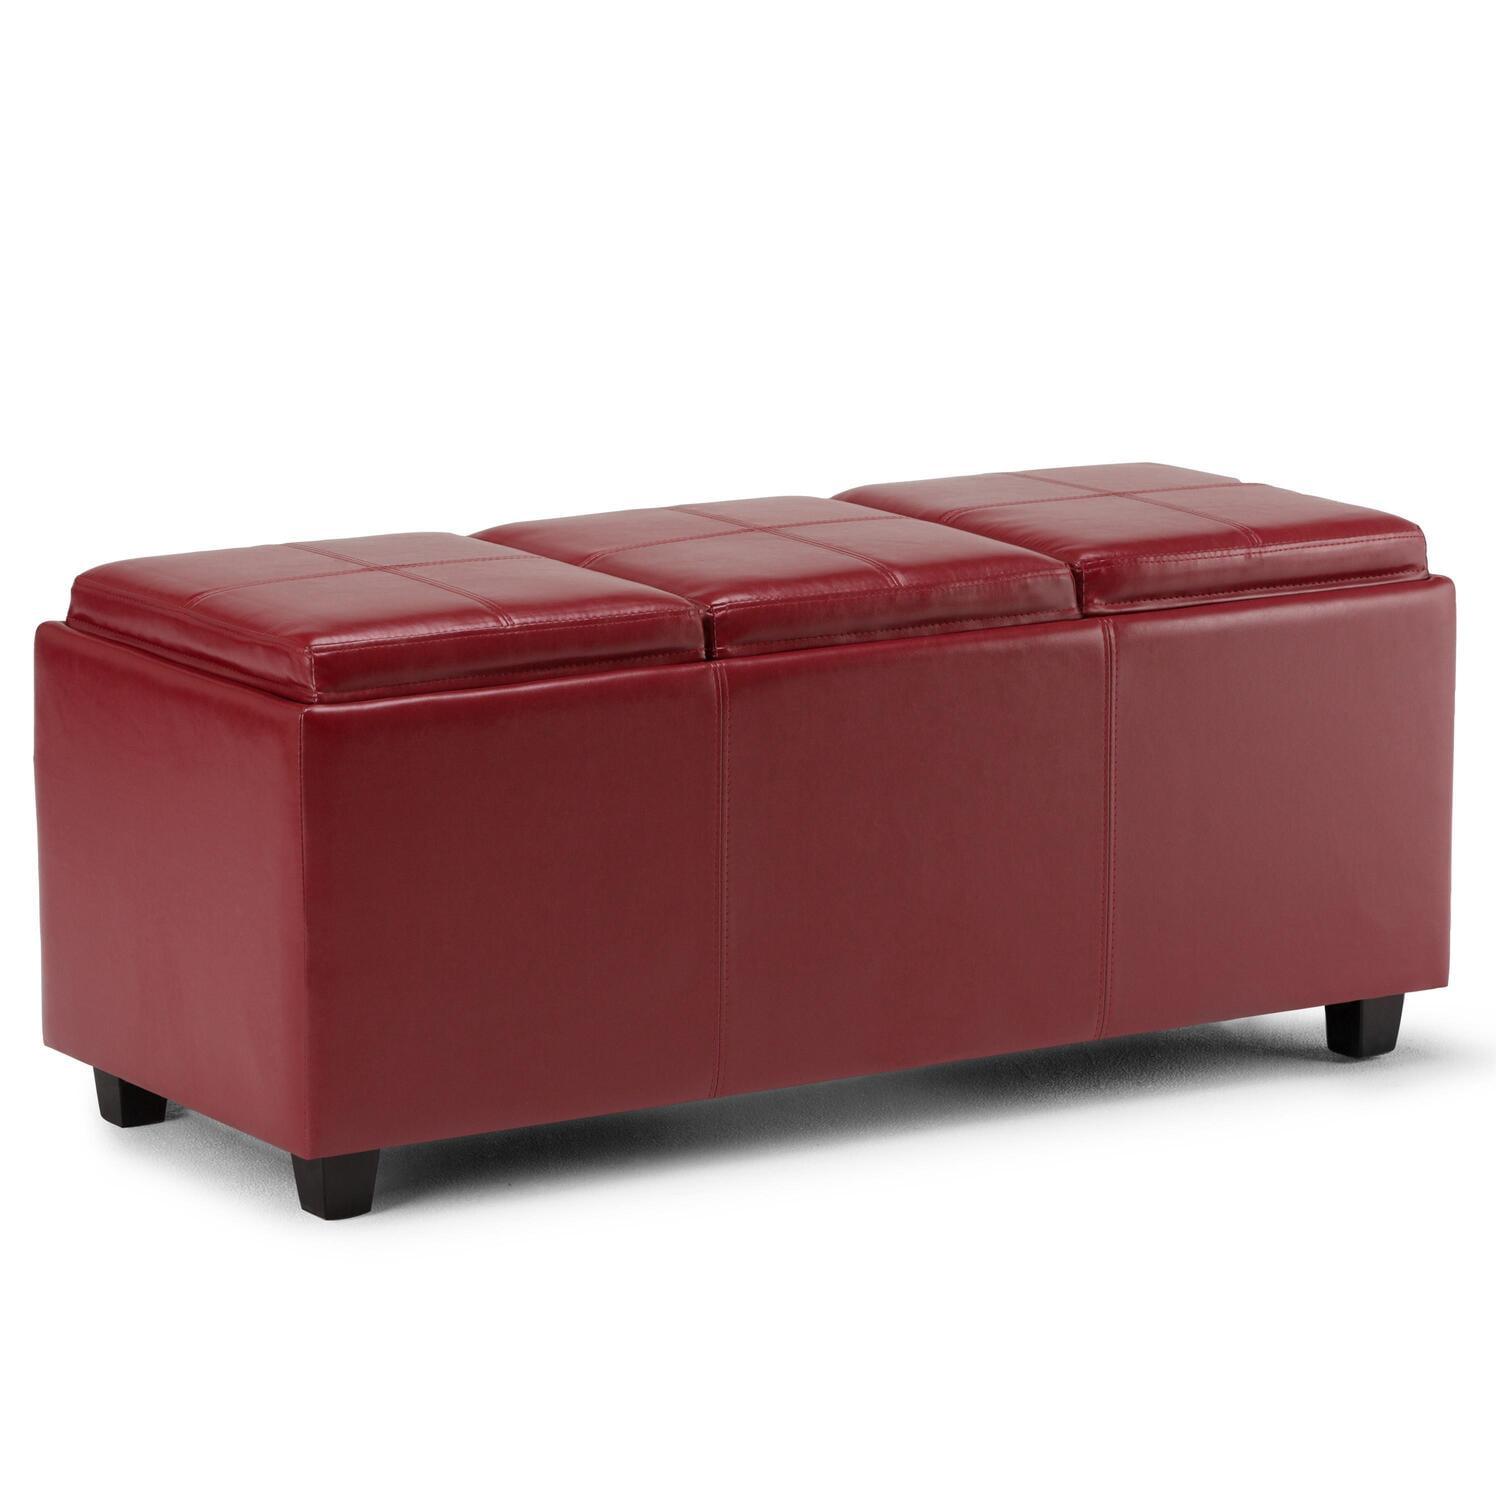 Radicchio Red Avalon Faux Leather Storage Ottoman with Tray